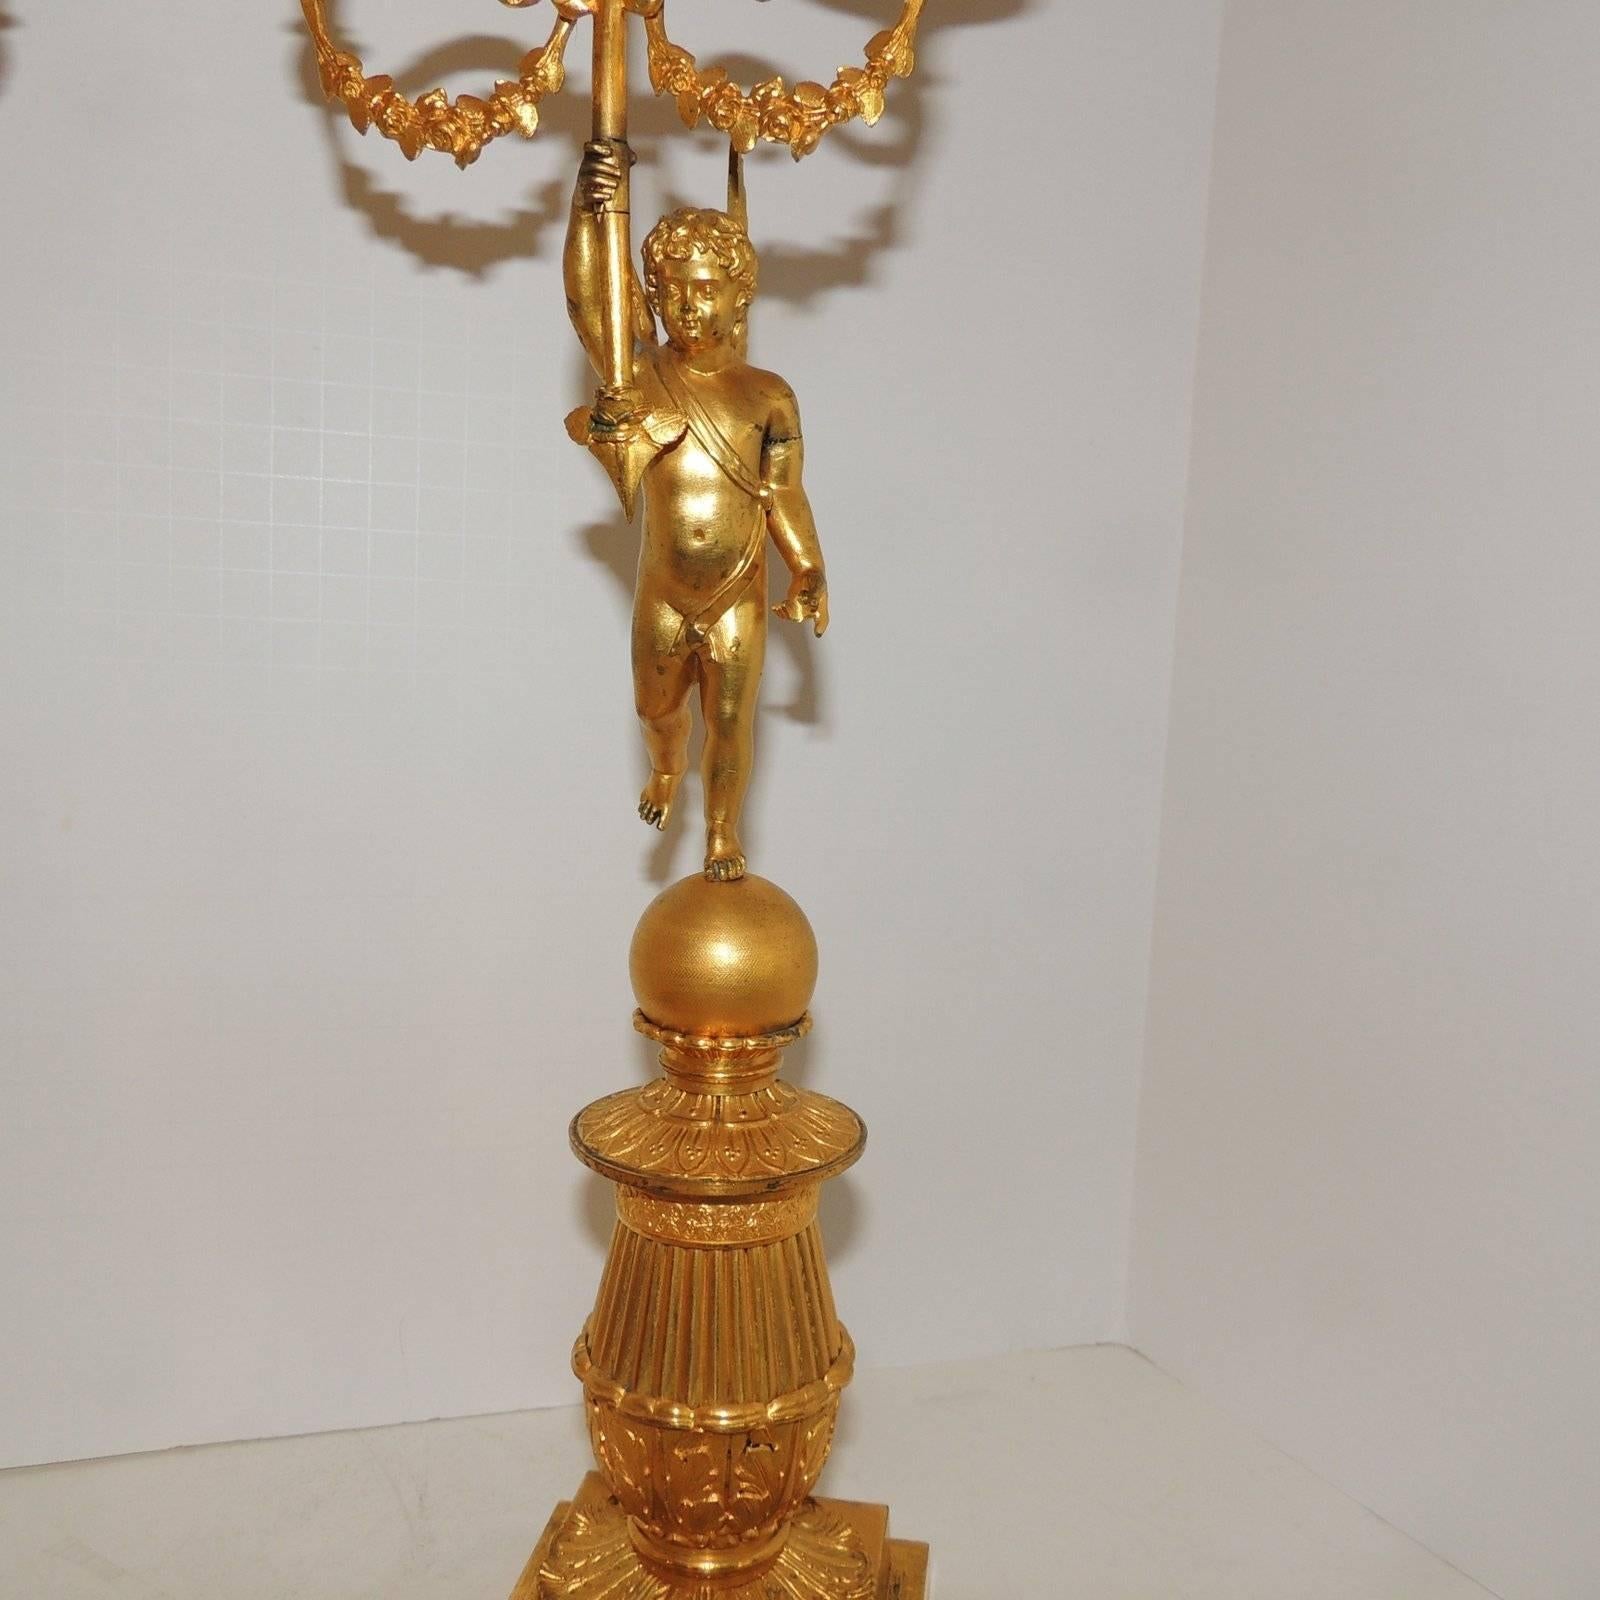 French Wonderful Pair Dore Bronze Two-Arm Winged Putti Cherub Neoclassical Candelabras For Sale